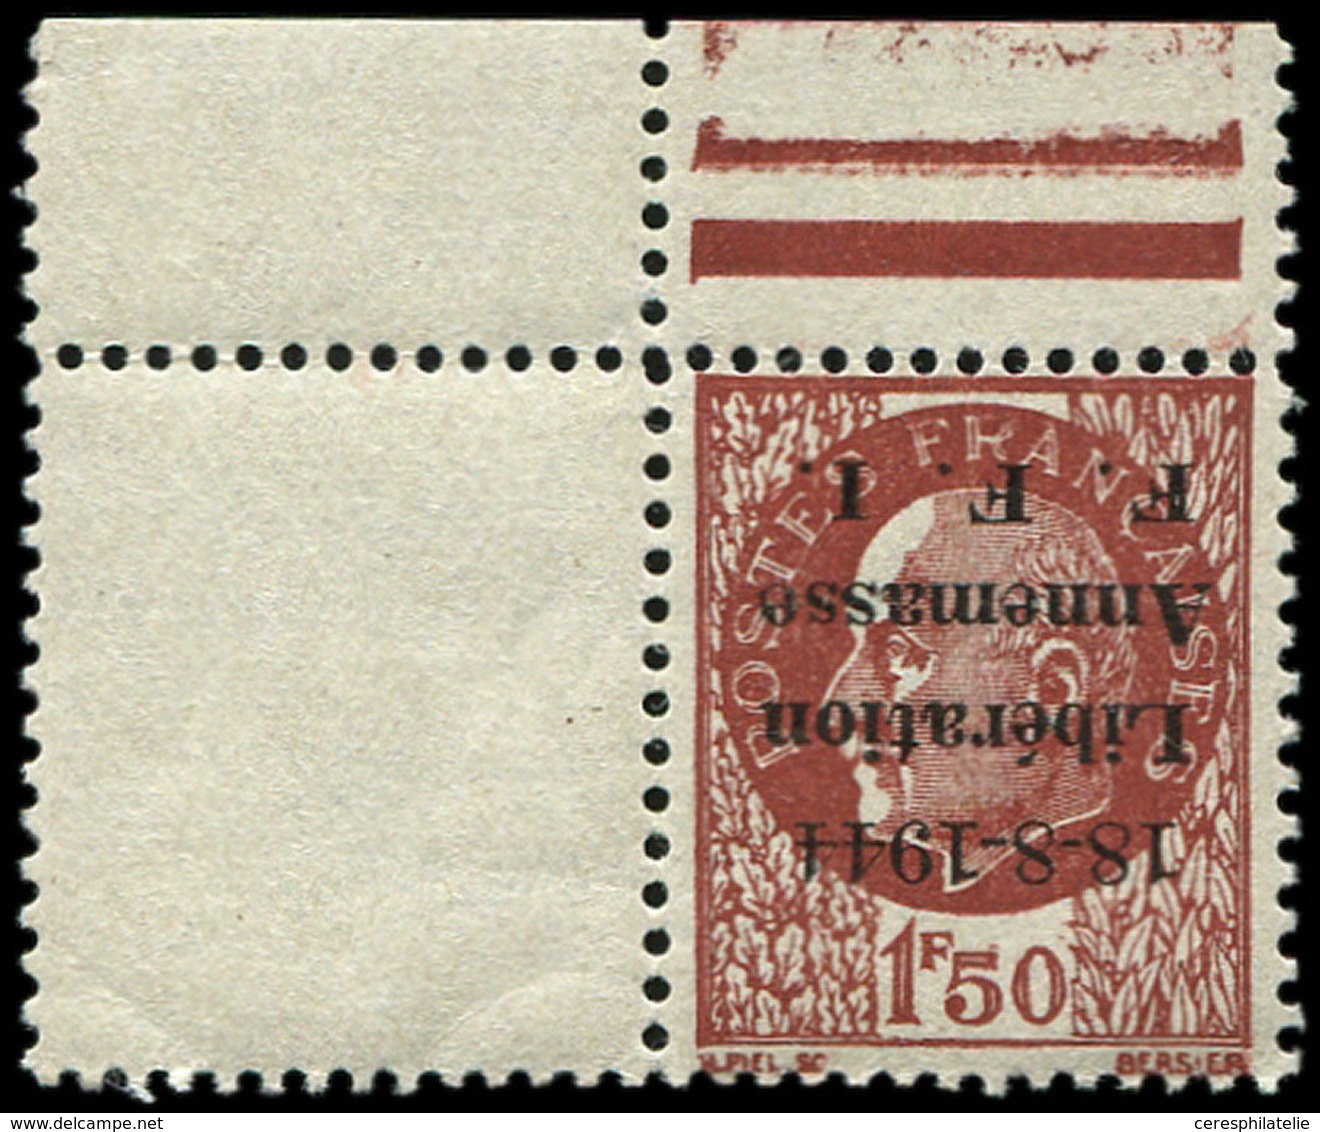 ** TIMBRES DE LIBERATION - ANNEMASSE 25a : 1f50 Brun-rouge, Chiffres MAIGRES, Surcharge RENVERSEE, Cdf, TTB - Befreiung